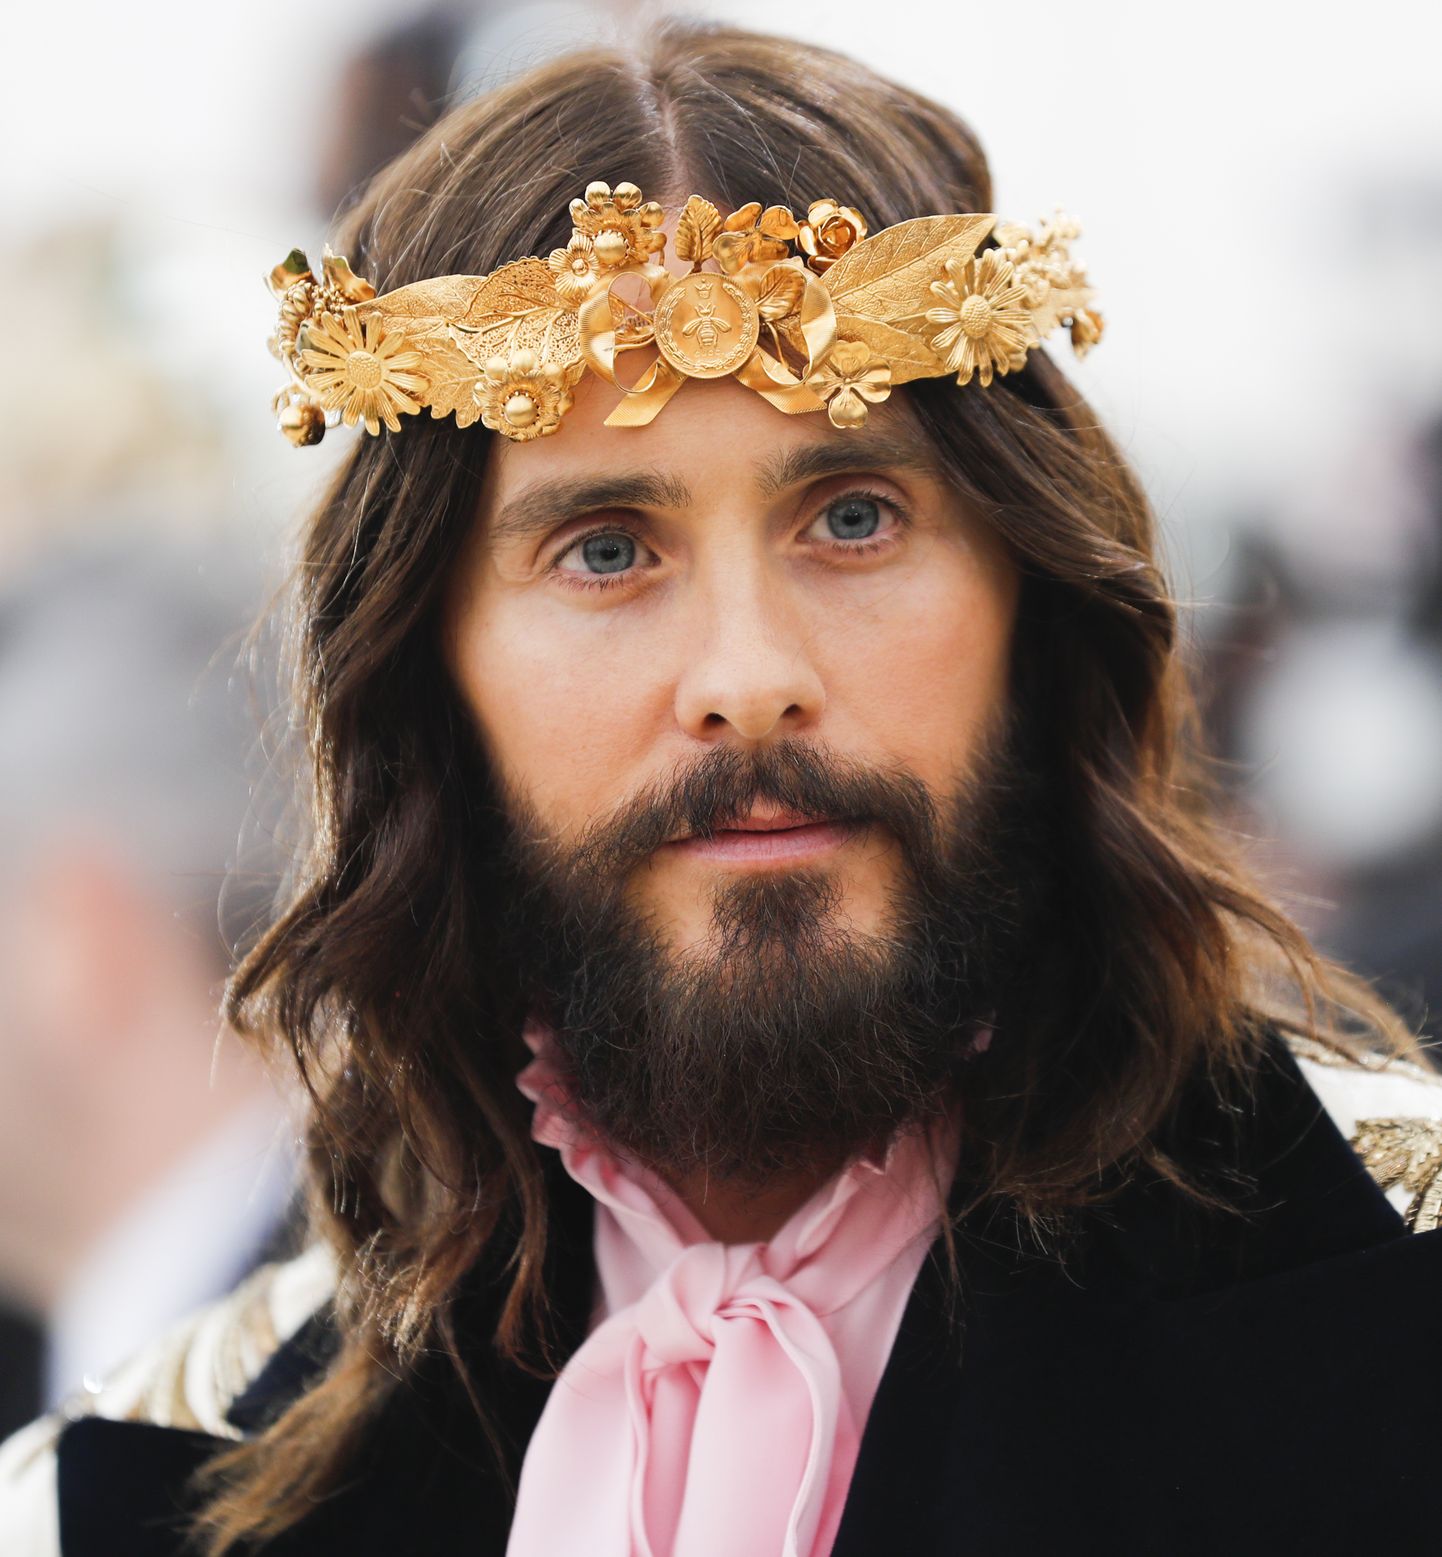 Actor Jared Leto.